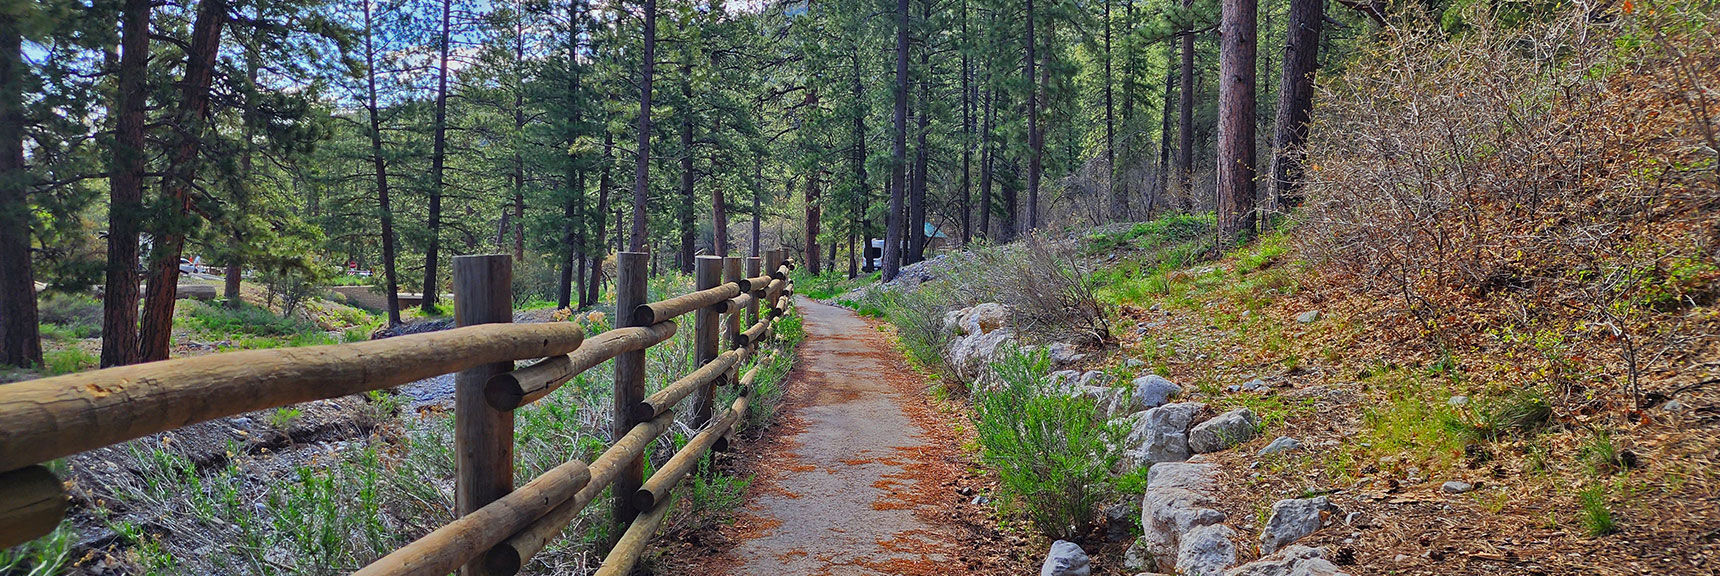 Continuing Along This Beautiful Forested Trail. Lower Trail is Much Dryer Climate Zone. | Acastus Trail | Mt Charleston Wilderness | Spring Mountains, Nevada